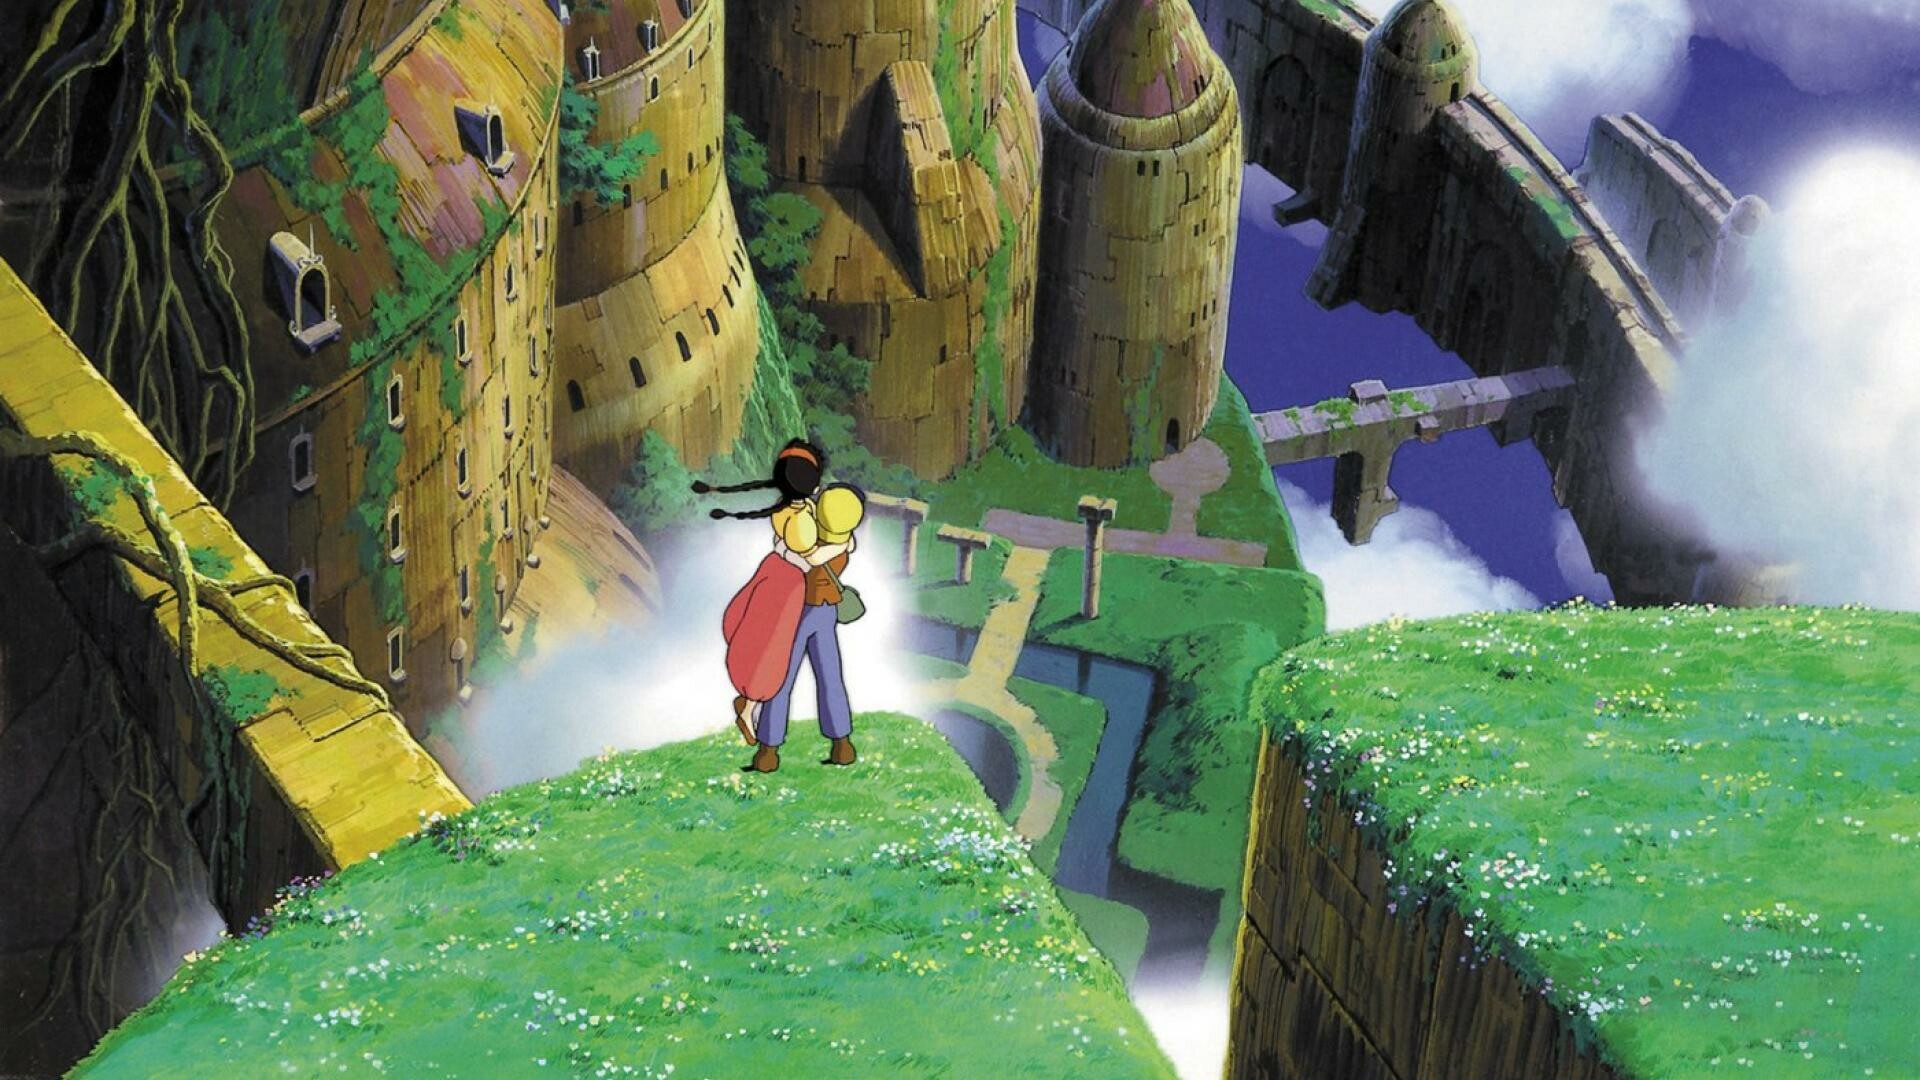 Laputa: Castle in the Sky: Flying island, Young orphan Sheeta, Adventures of a boy and girl. 1920x1080 Full HD Wallpaper.